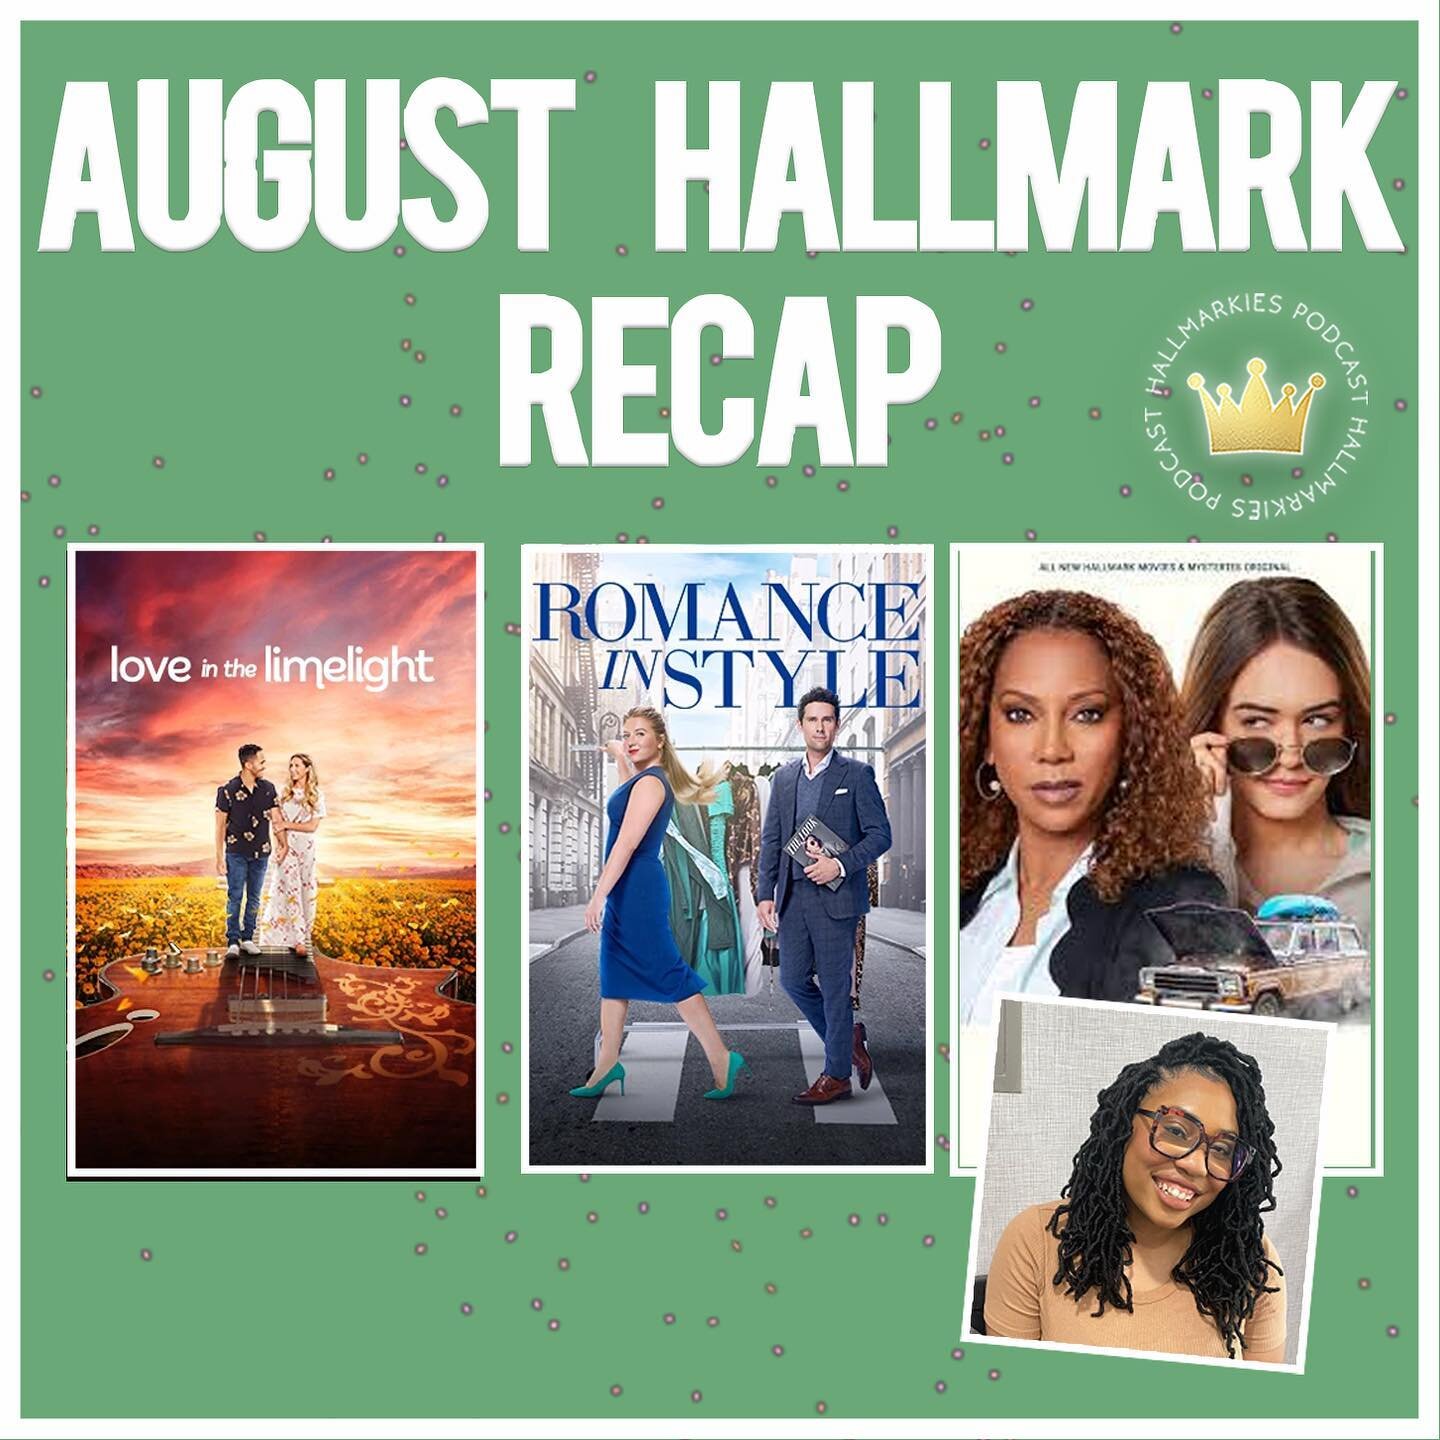 We cover 11 movies! August Hallmark Recap with Dear Hallmark (Splash of Love, Groundswell) 

Available wherever you listen to podcasts 
@michelle_b_82 @rachels_reviews #hallmarkies @dearhallmark 

Link in Bio

YT: youtu.be/hwYy9J7wCnc 
Audio: https:/